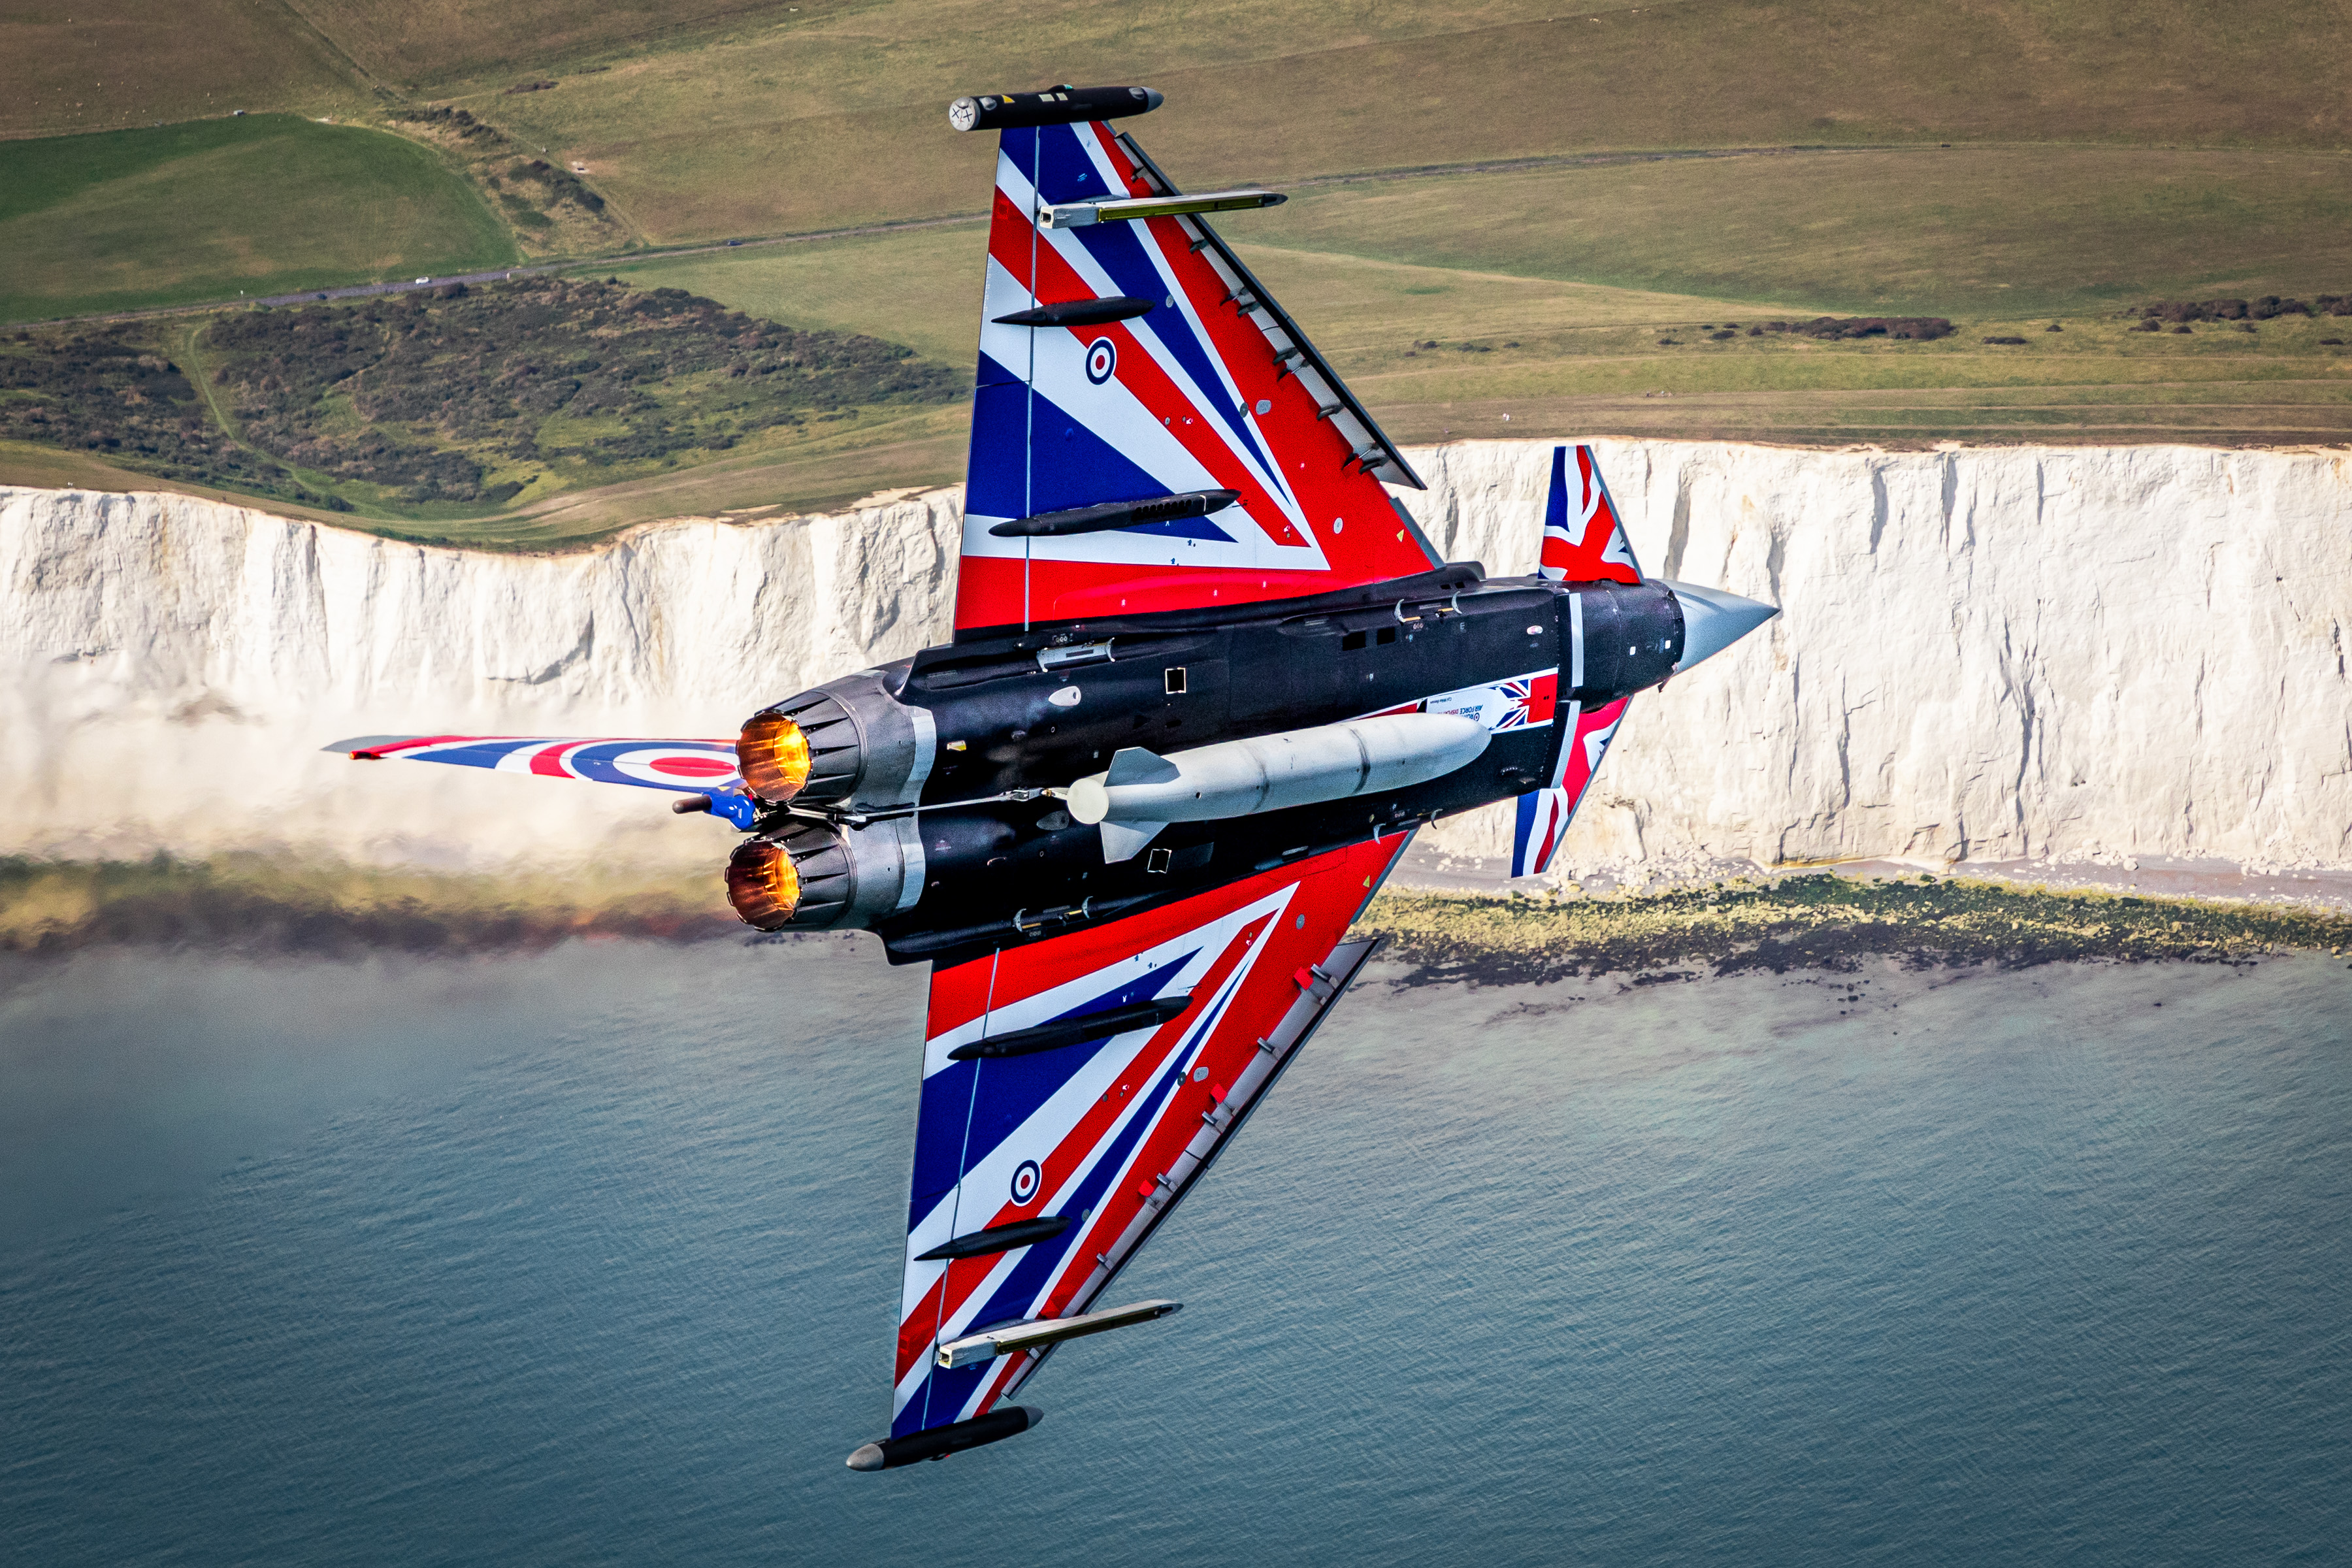 Image shows the Blackjack Typhoon flying over the white cliffs of Dover.